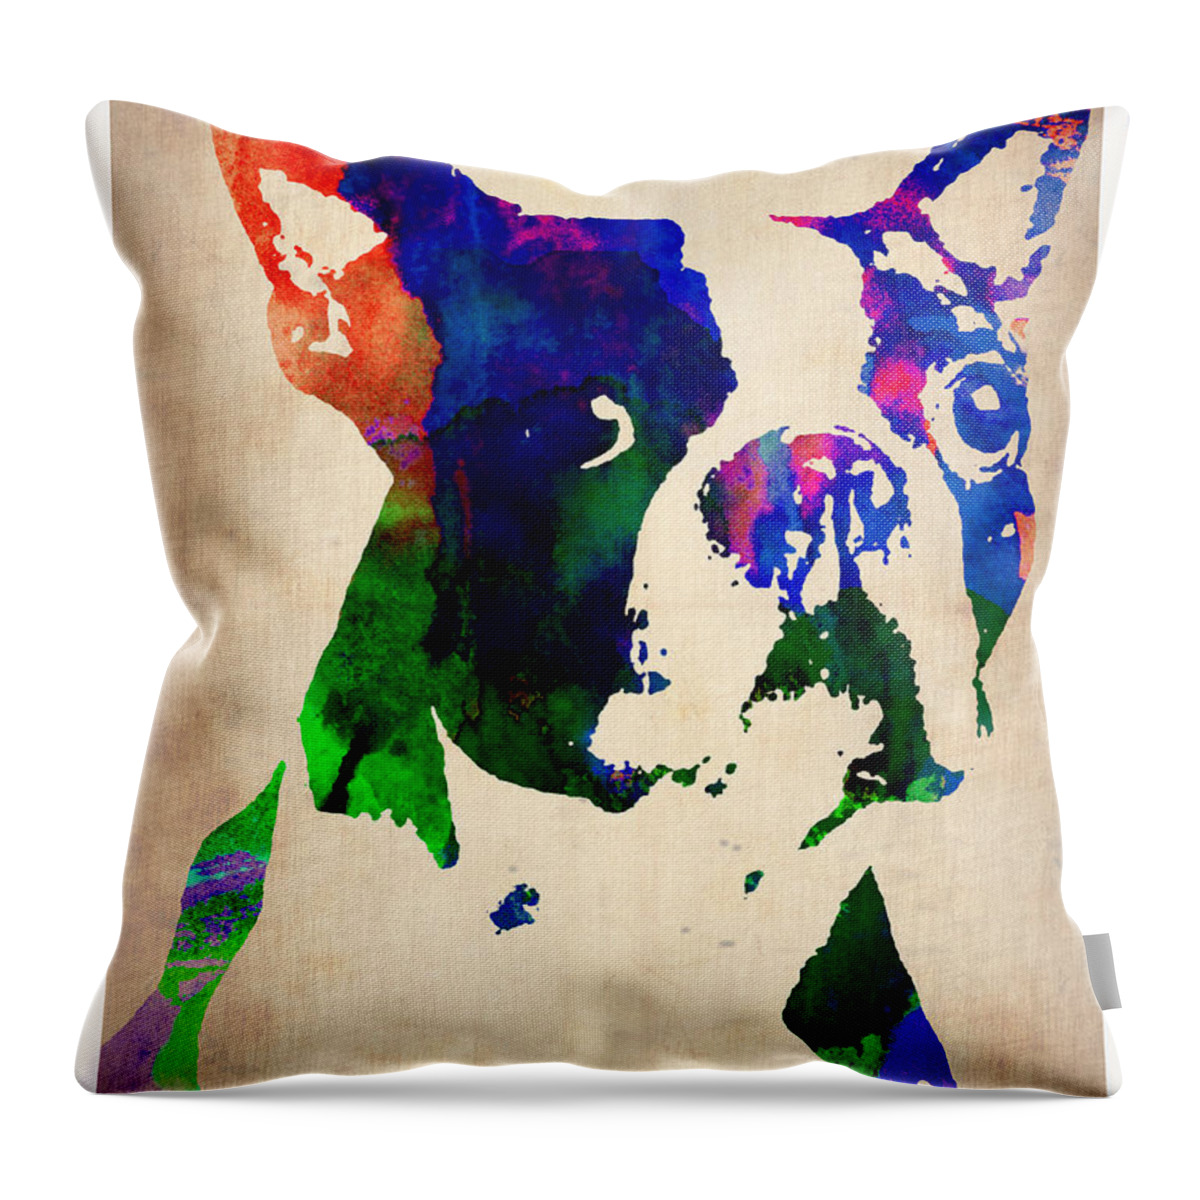 Boston Terrier Throw Pillow featuring the painting Boston Terrier Watercolor by Naxart Studio